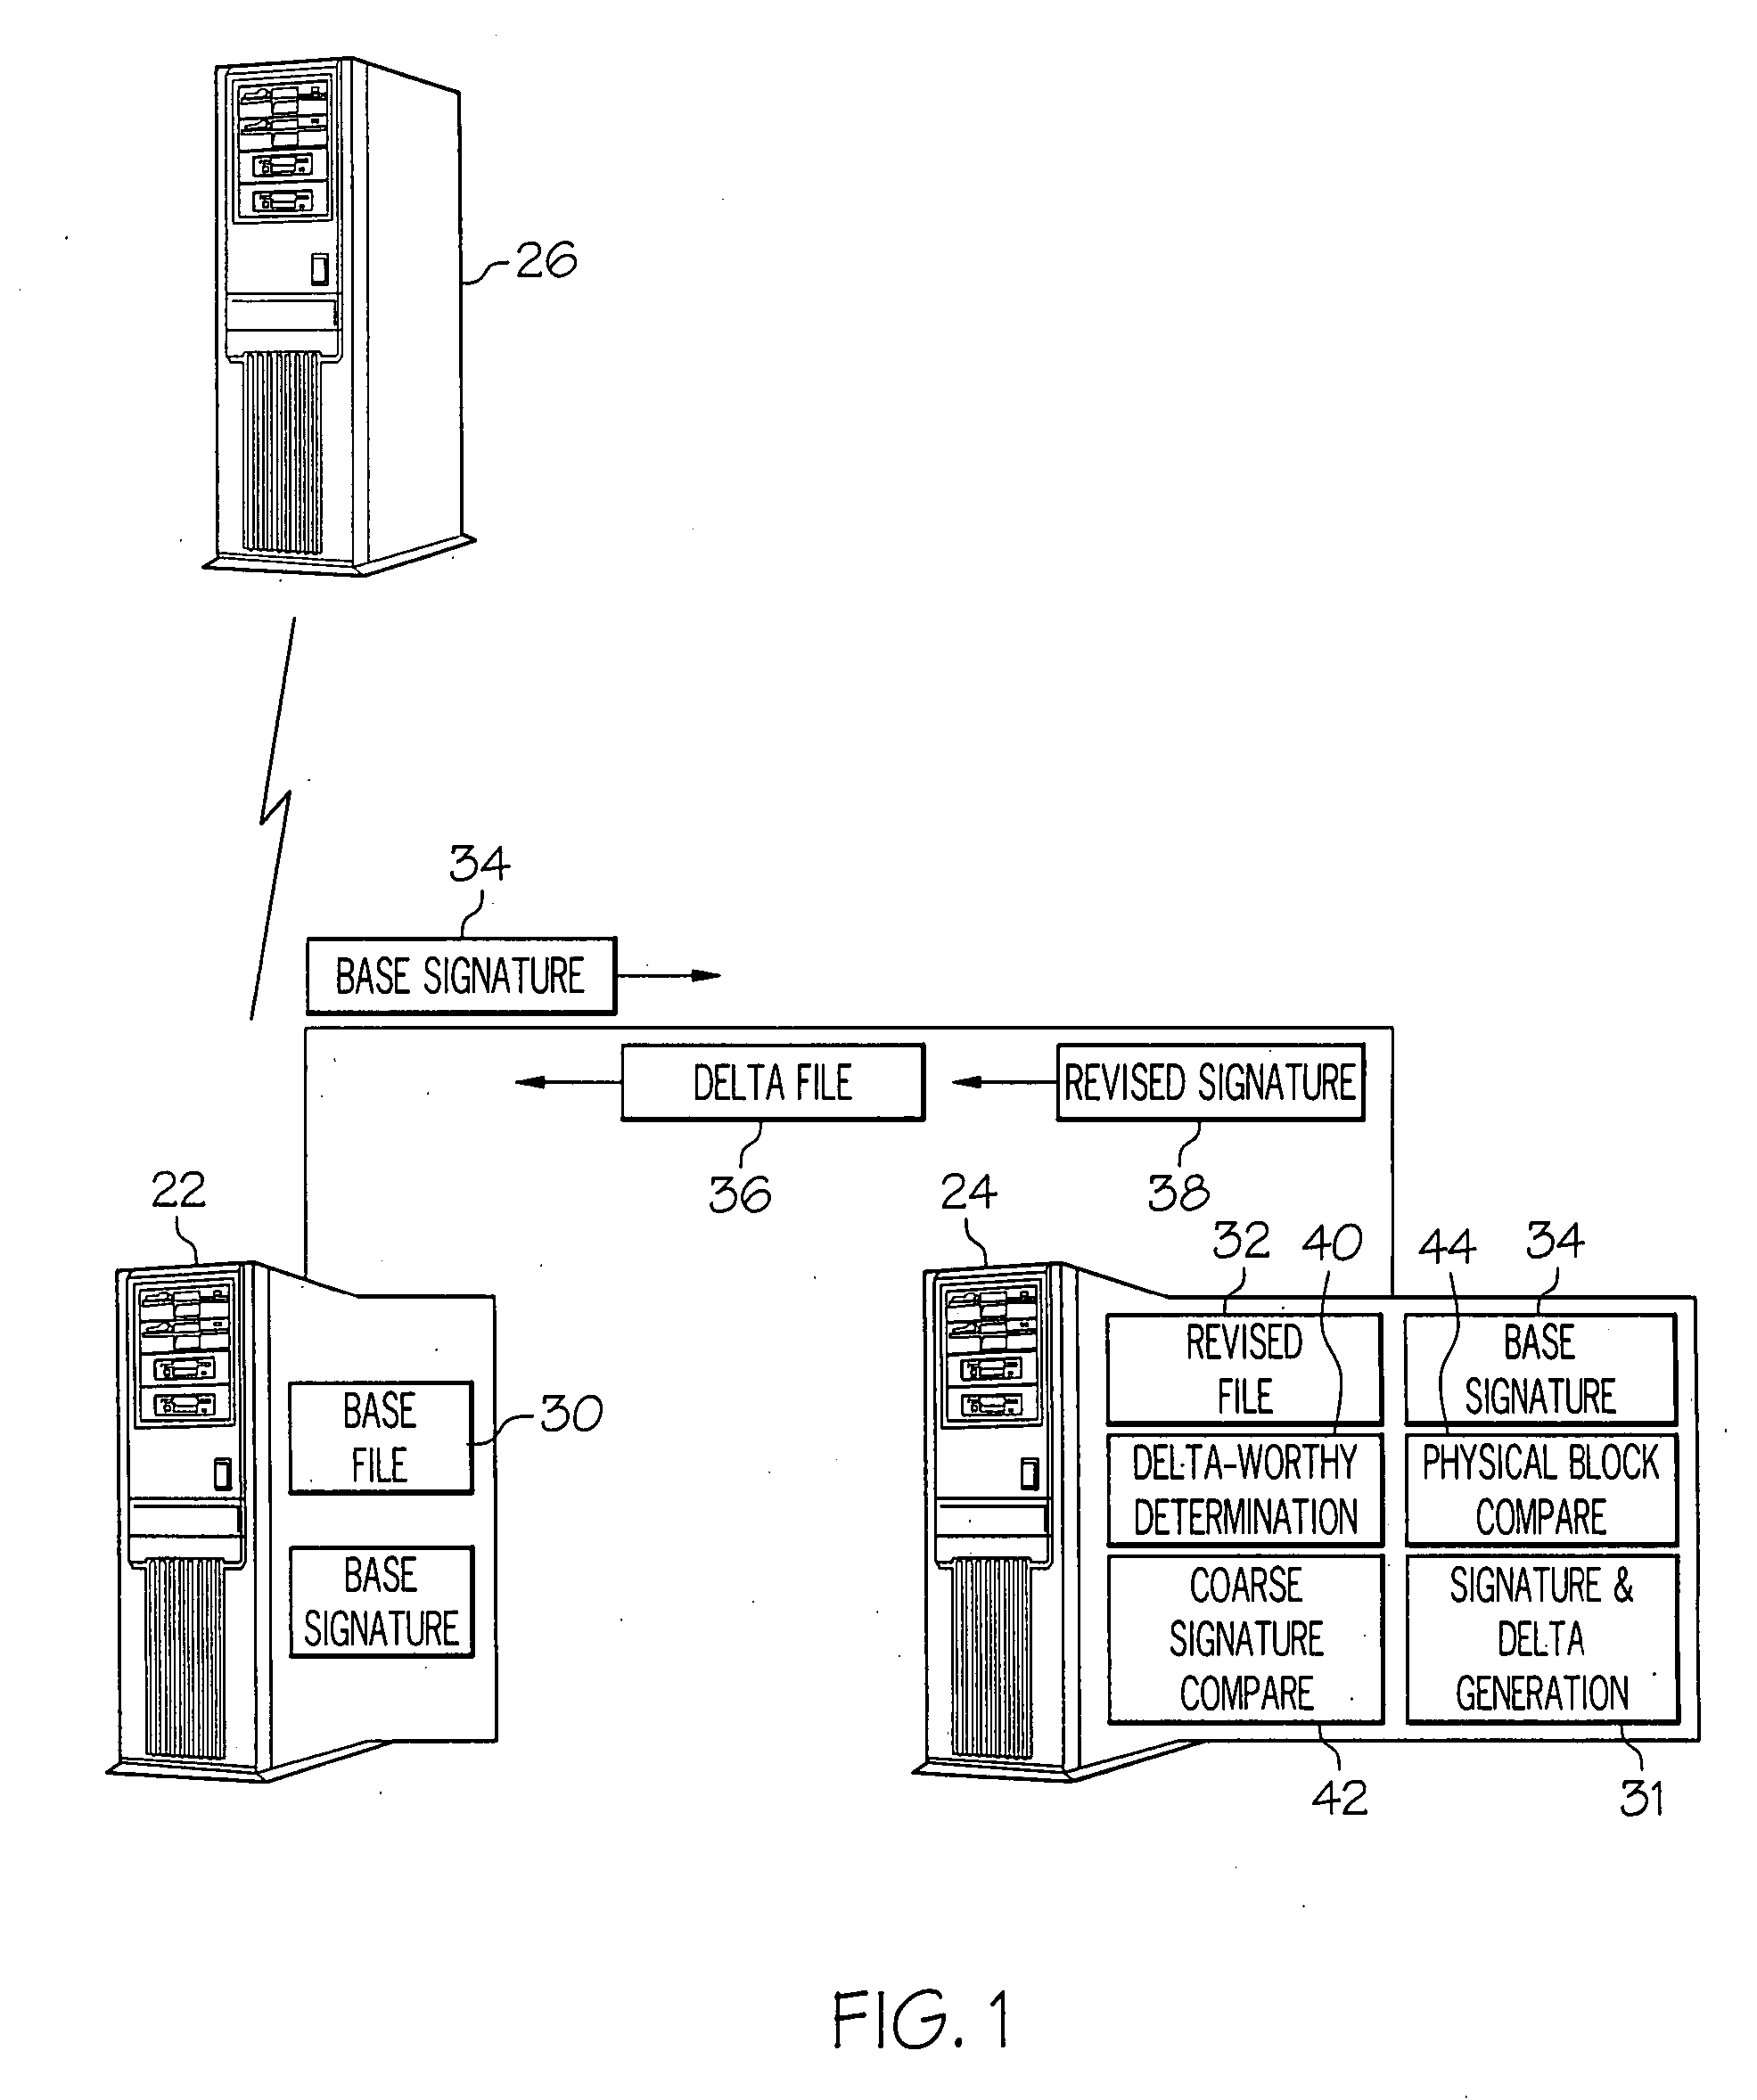 Methods and systems for file replication utilizing differences between versions of files